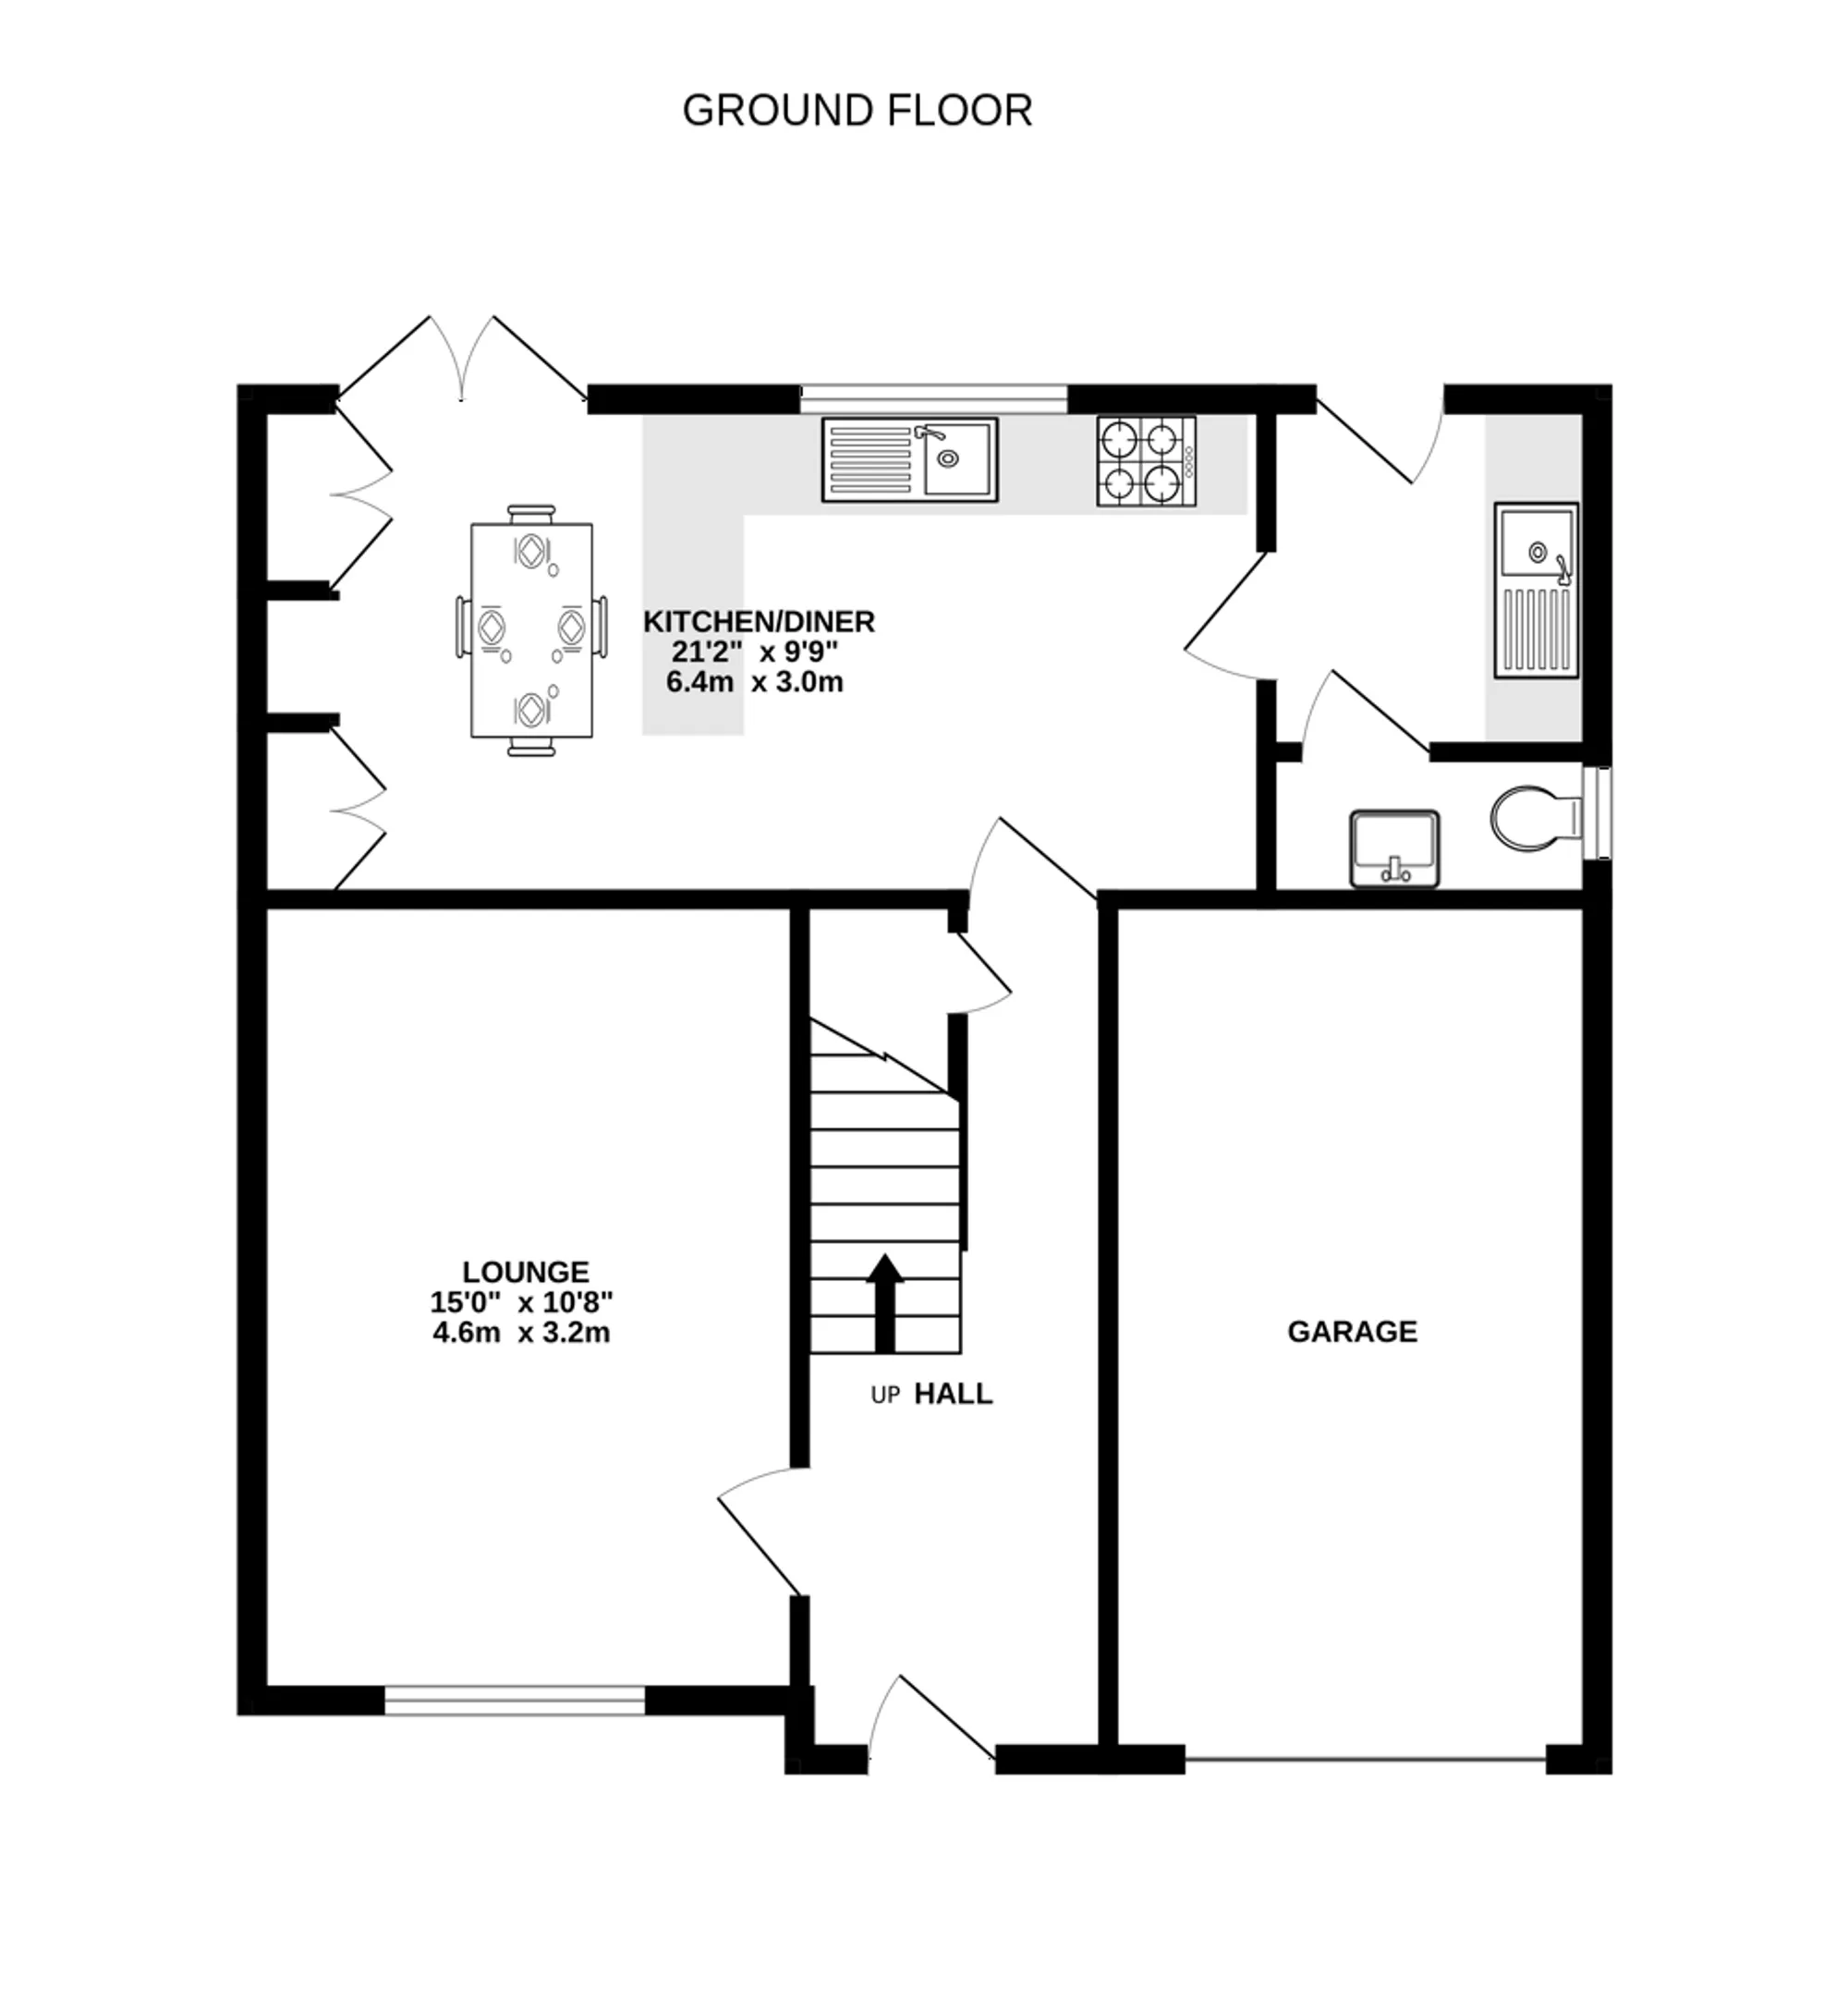 5 bed detached house for sale in Cinnabar Way, Loughborough - Property floorplan